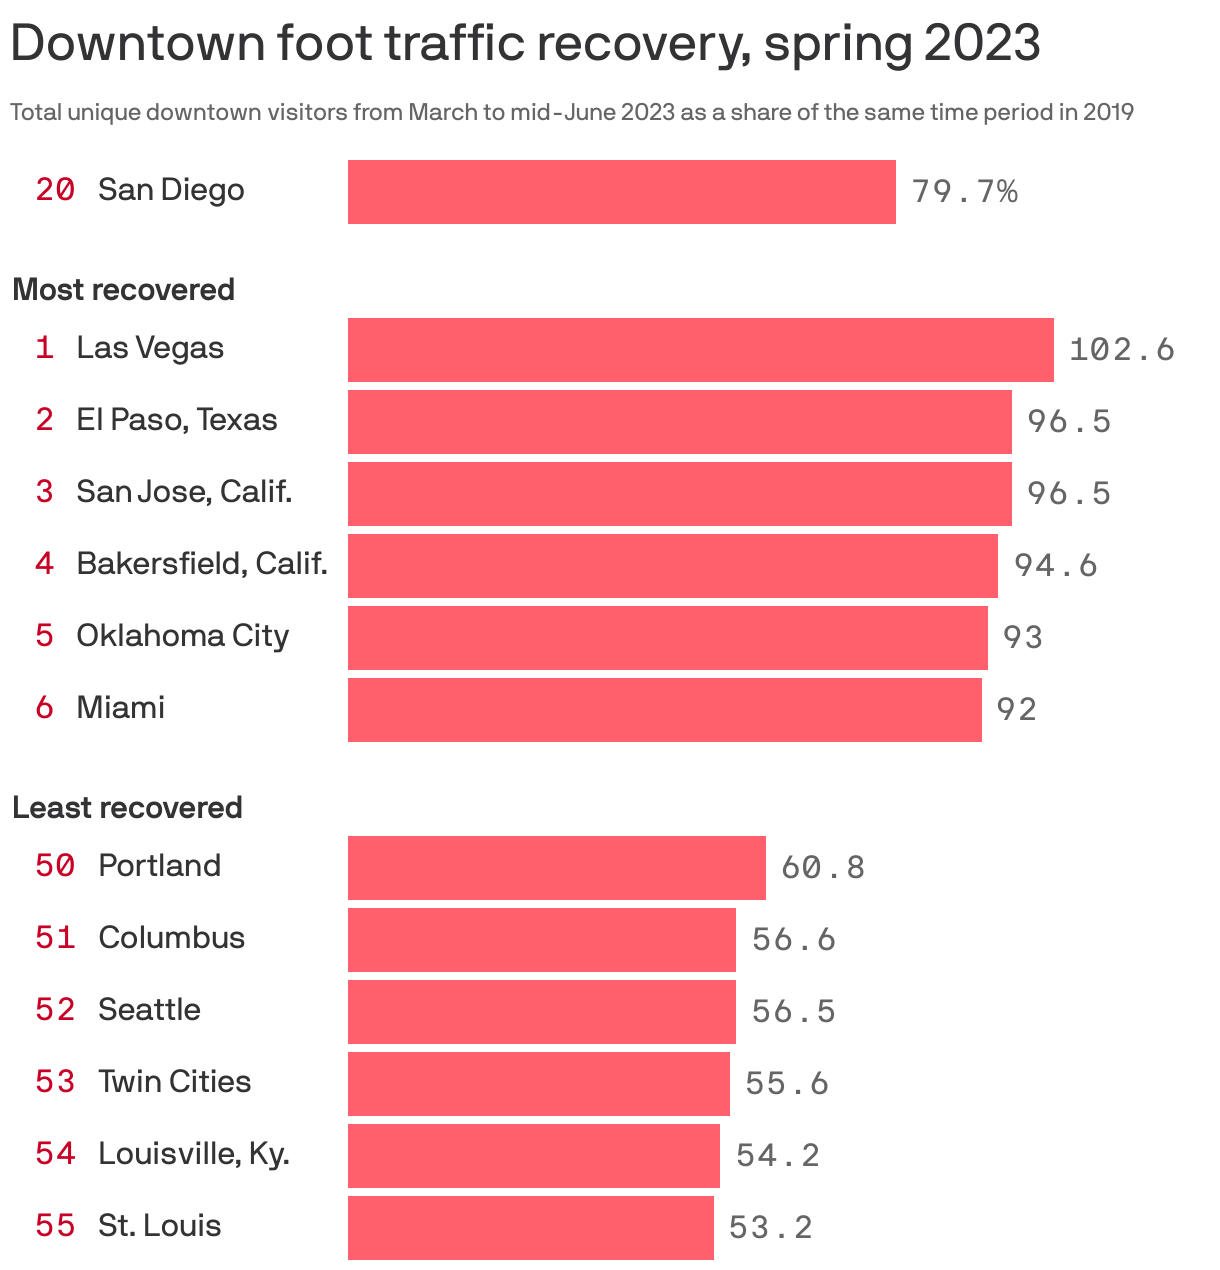 Downtown foot traffic recovery, spring 2023